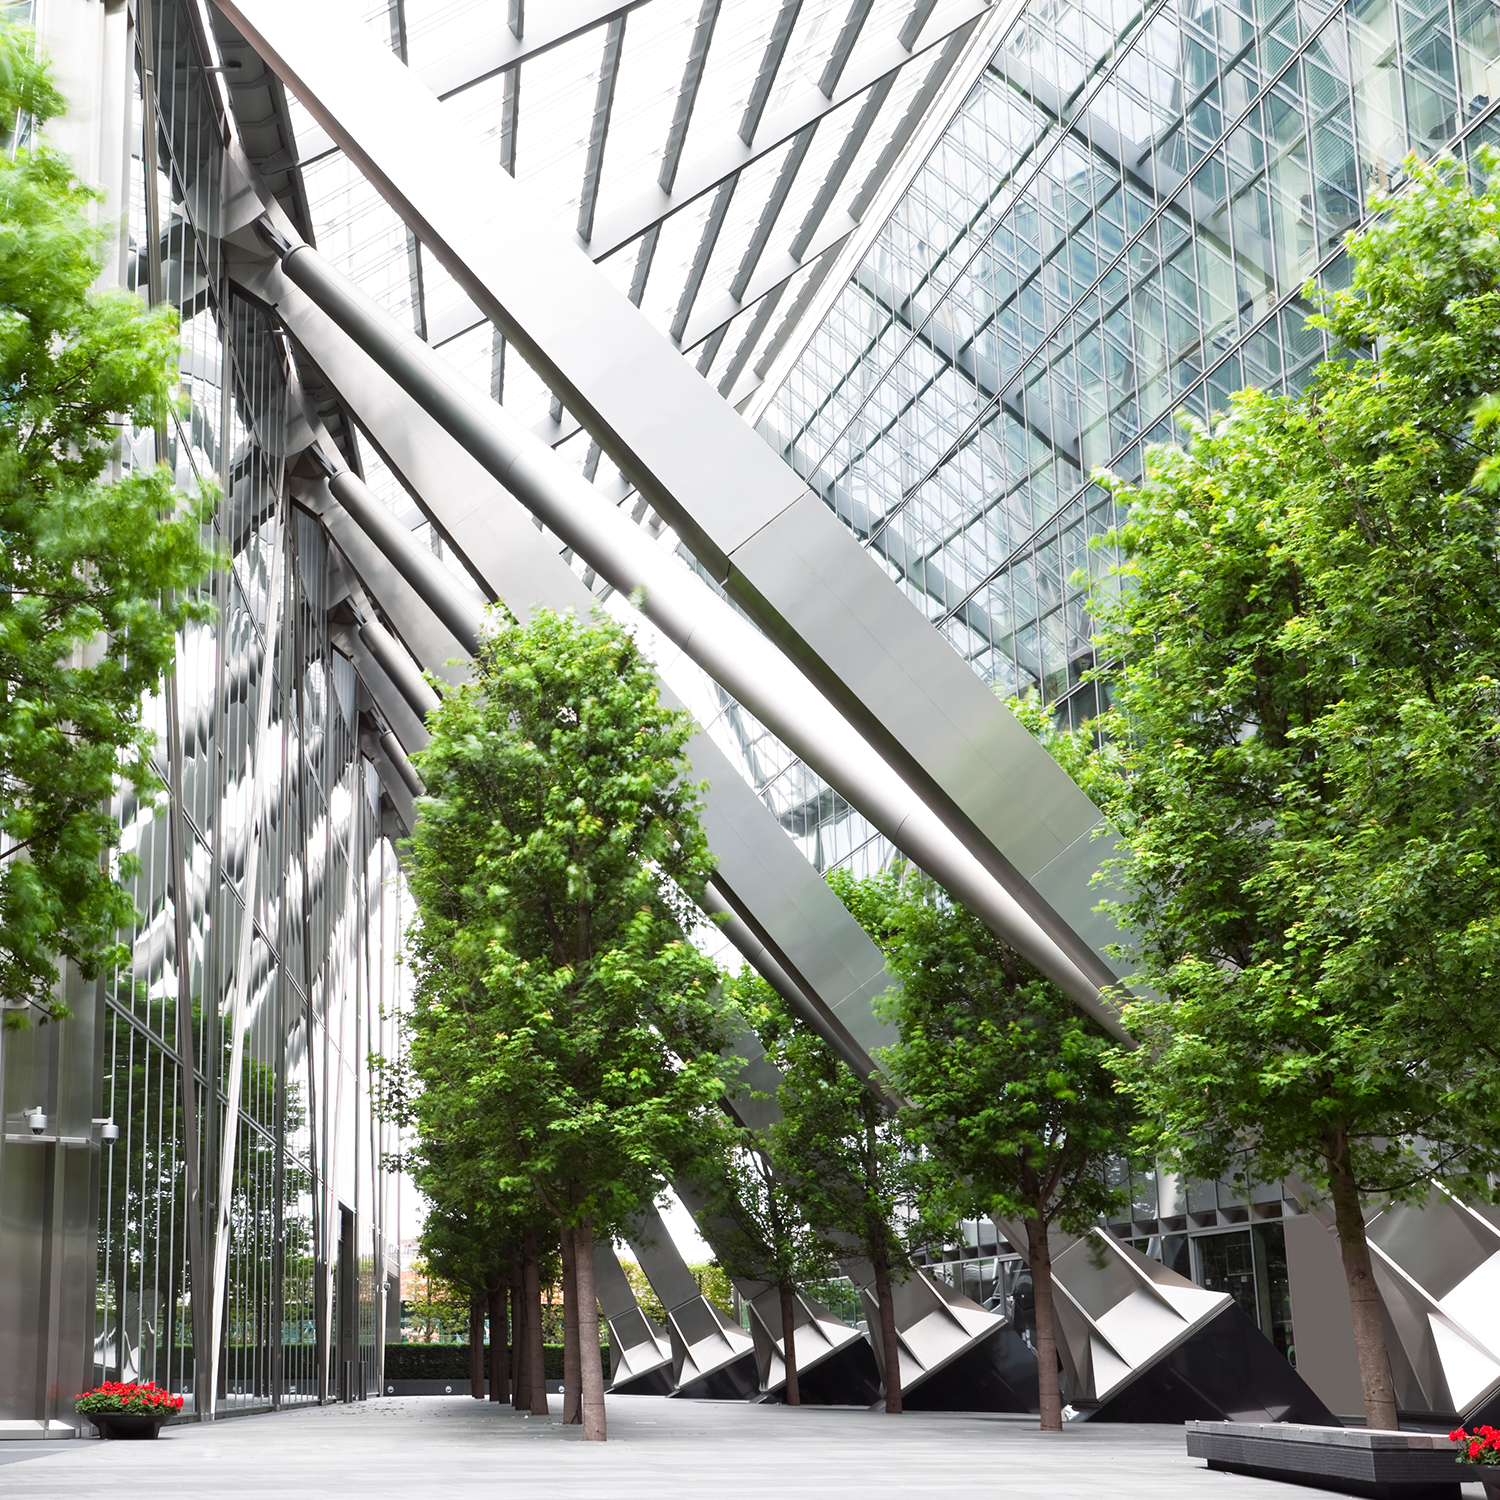 Trees-and-Office-Buildings-166006404_5616x3744